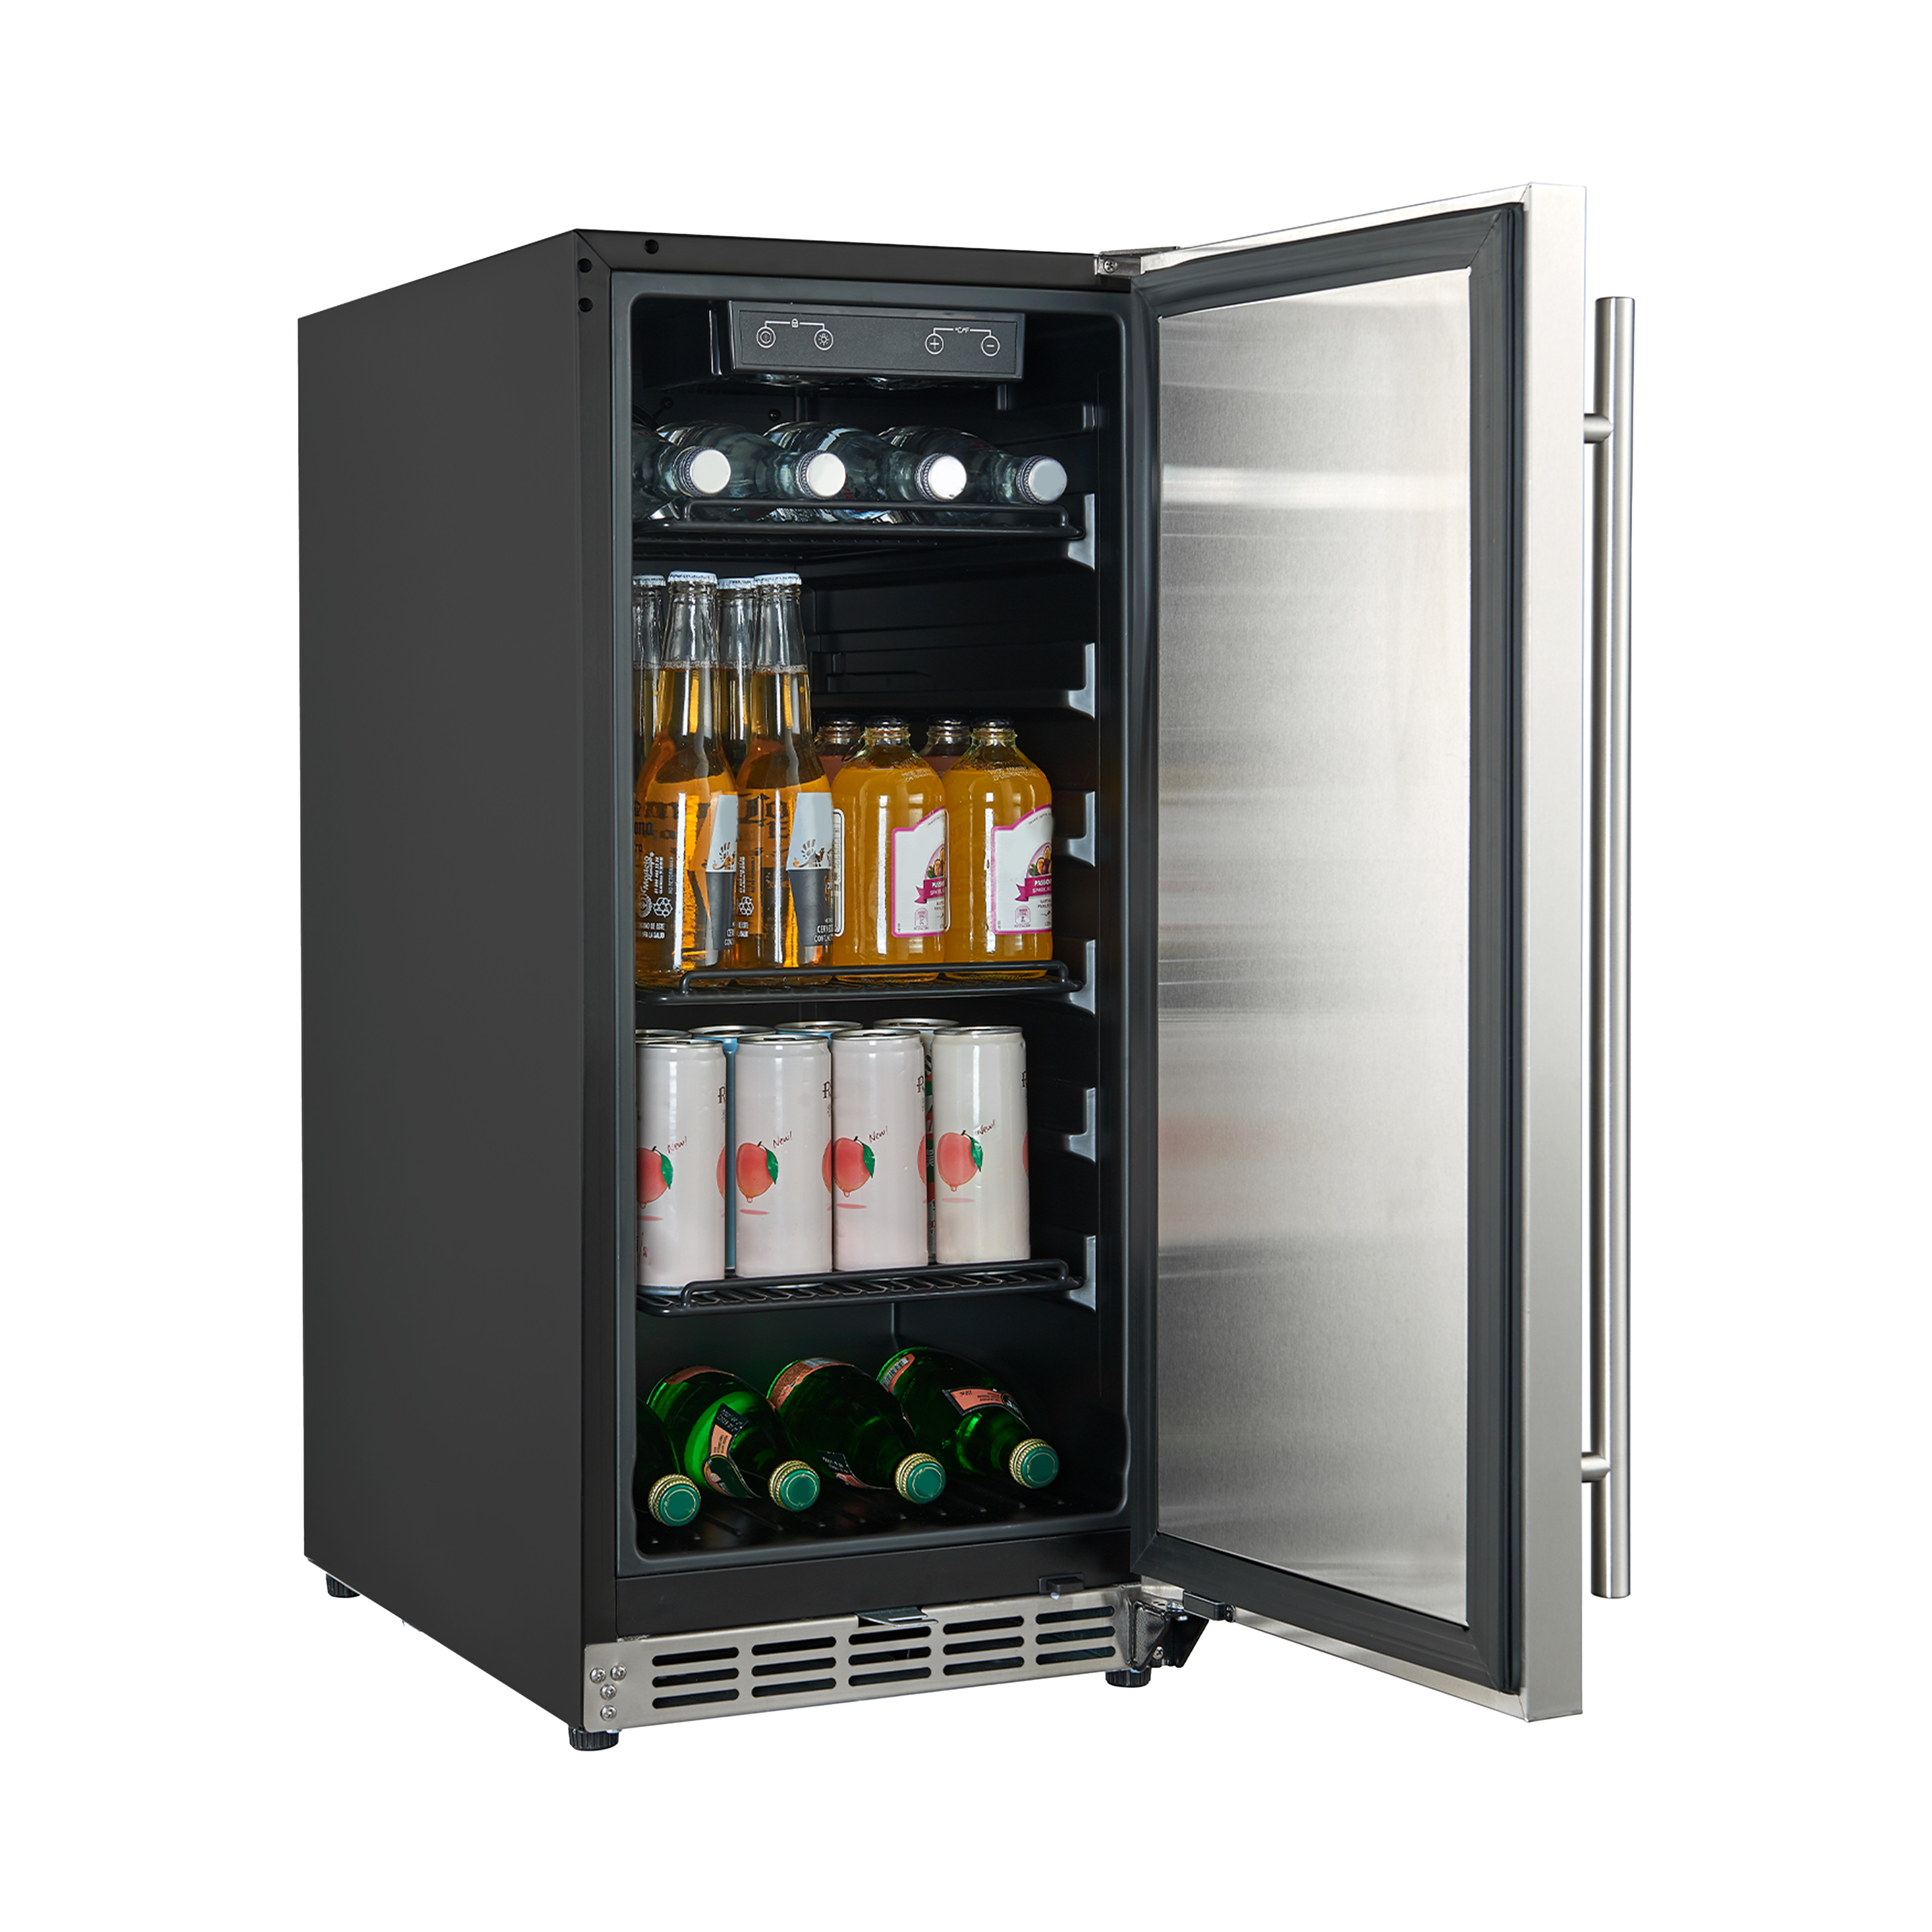 Side view of a 3.2 Cu Ft Black Outdoor Beverage Fridge with the door open, displaying a digital temperature control panel and filled with beverage bottles